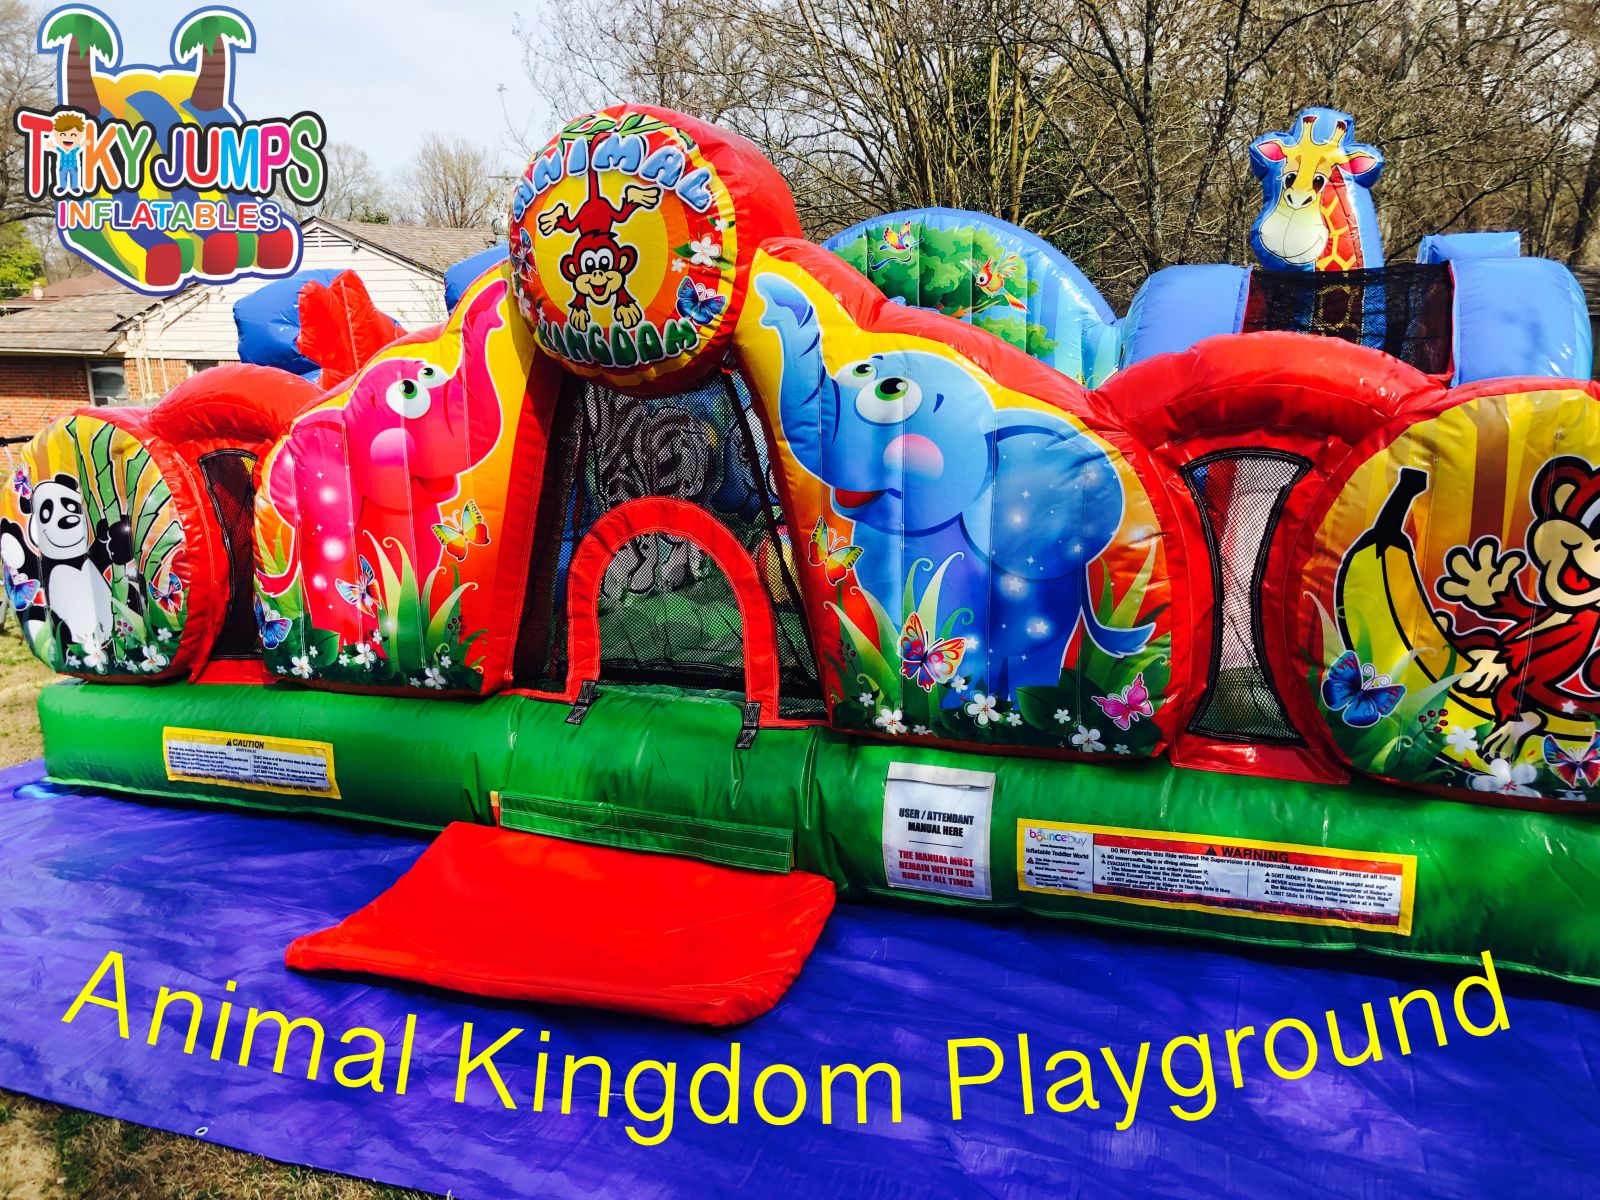 Playground rental for Toddlers Memphis TN